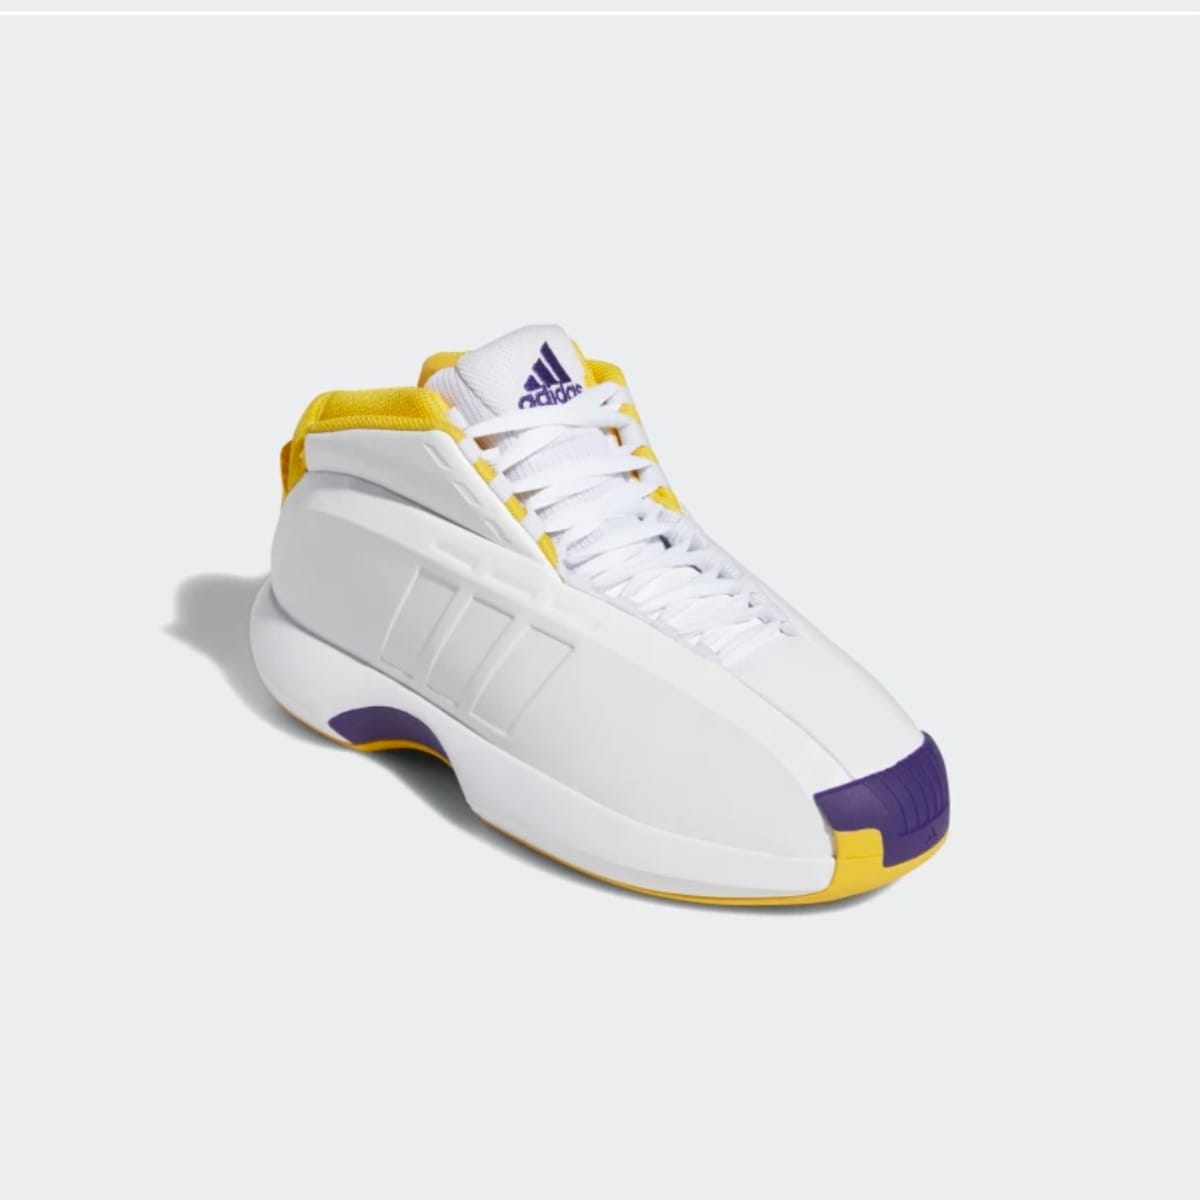 Adidas Crazy 'Lakers' Release - Sports Illustrated FanNation Kicks News, Analysis and